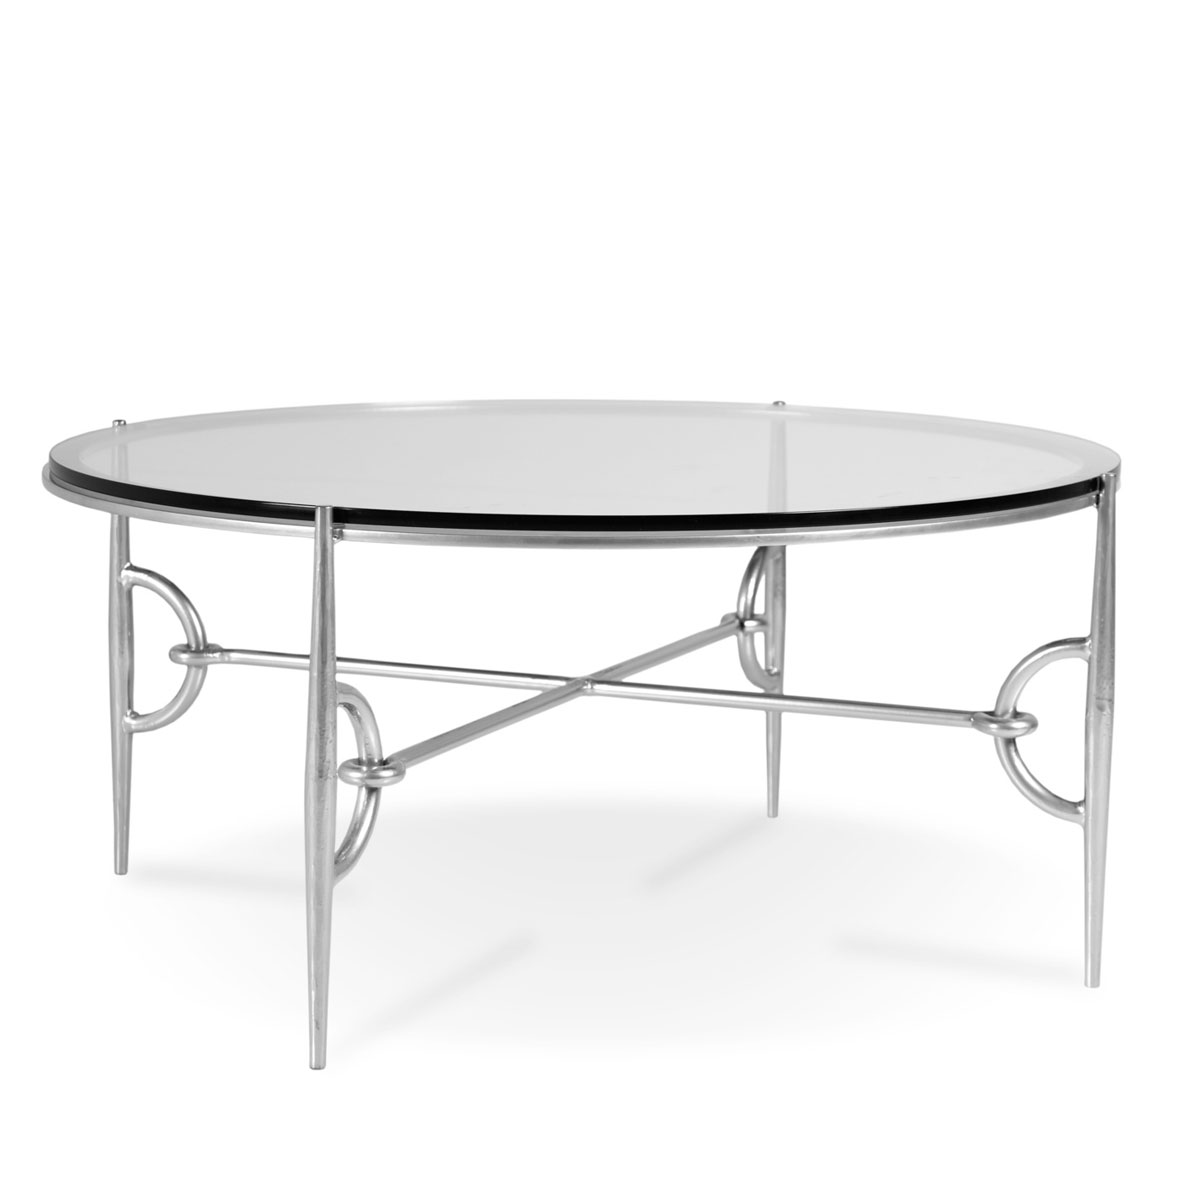 Charleston Forge Paddock 42 in Round Cocktail Table